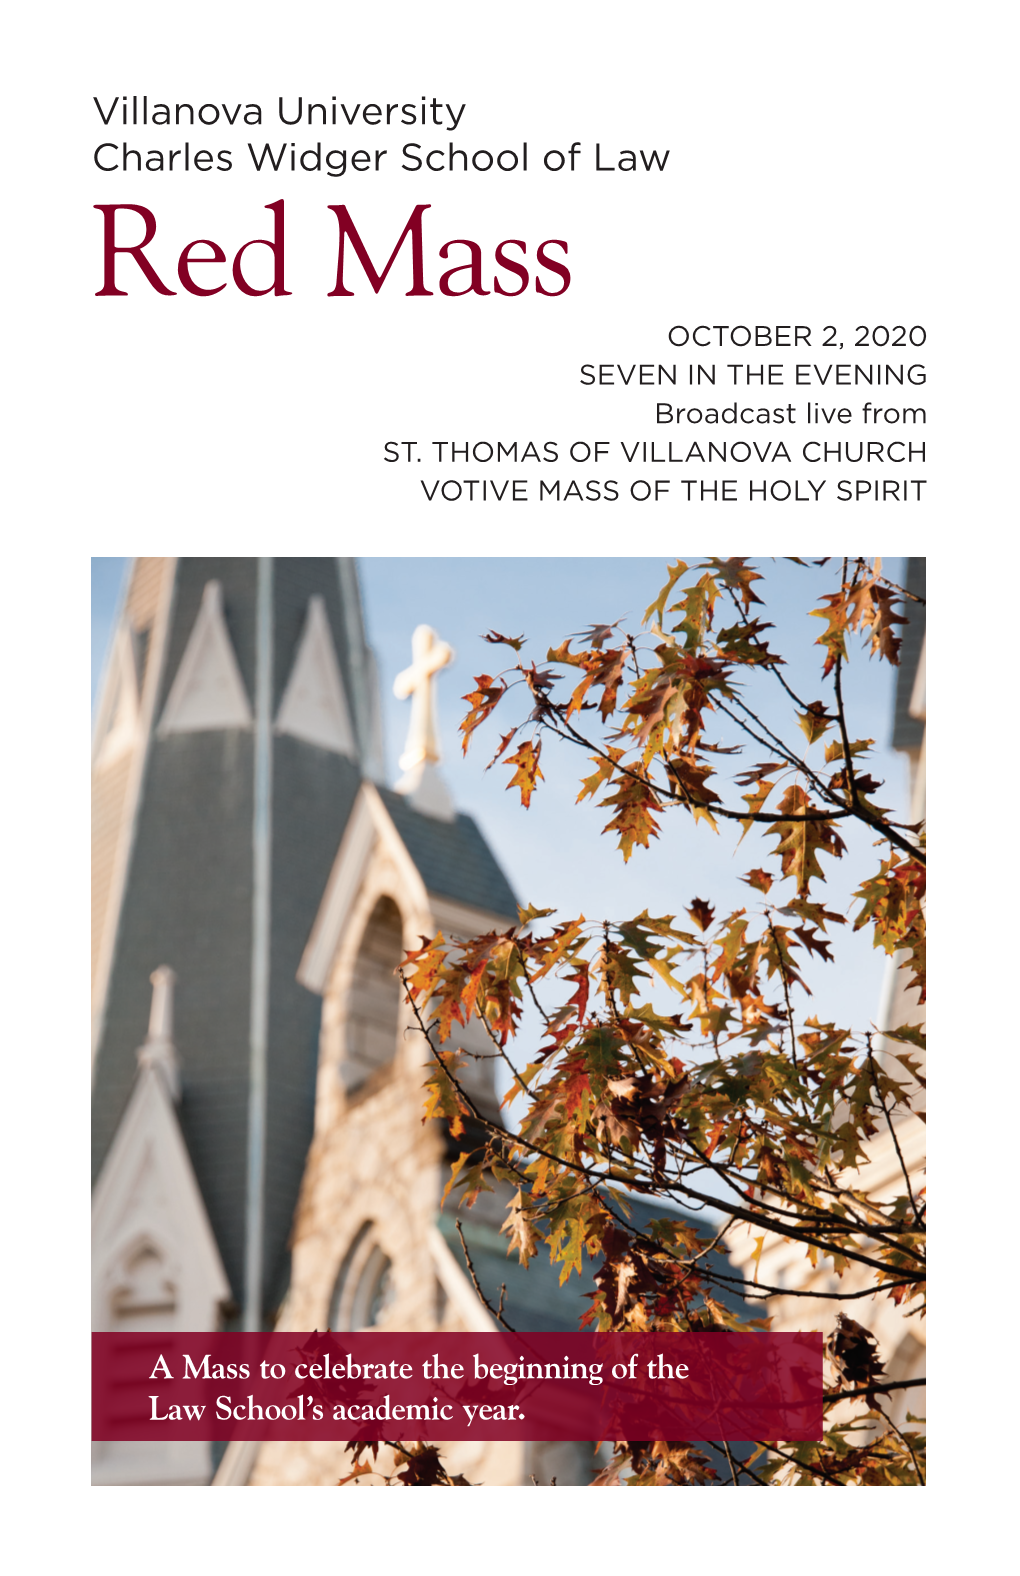 Red Mass OCTOBER 2, 2020 SEVEN in the EVENING Broadcast Live from ST